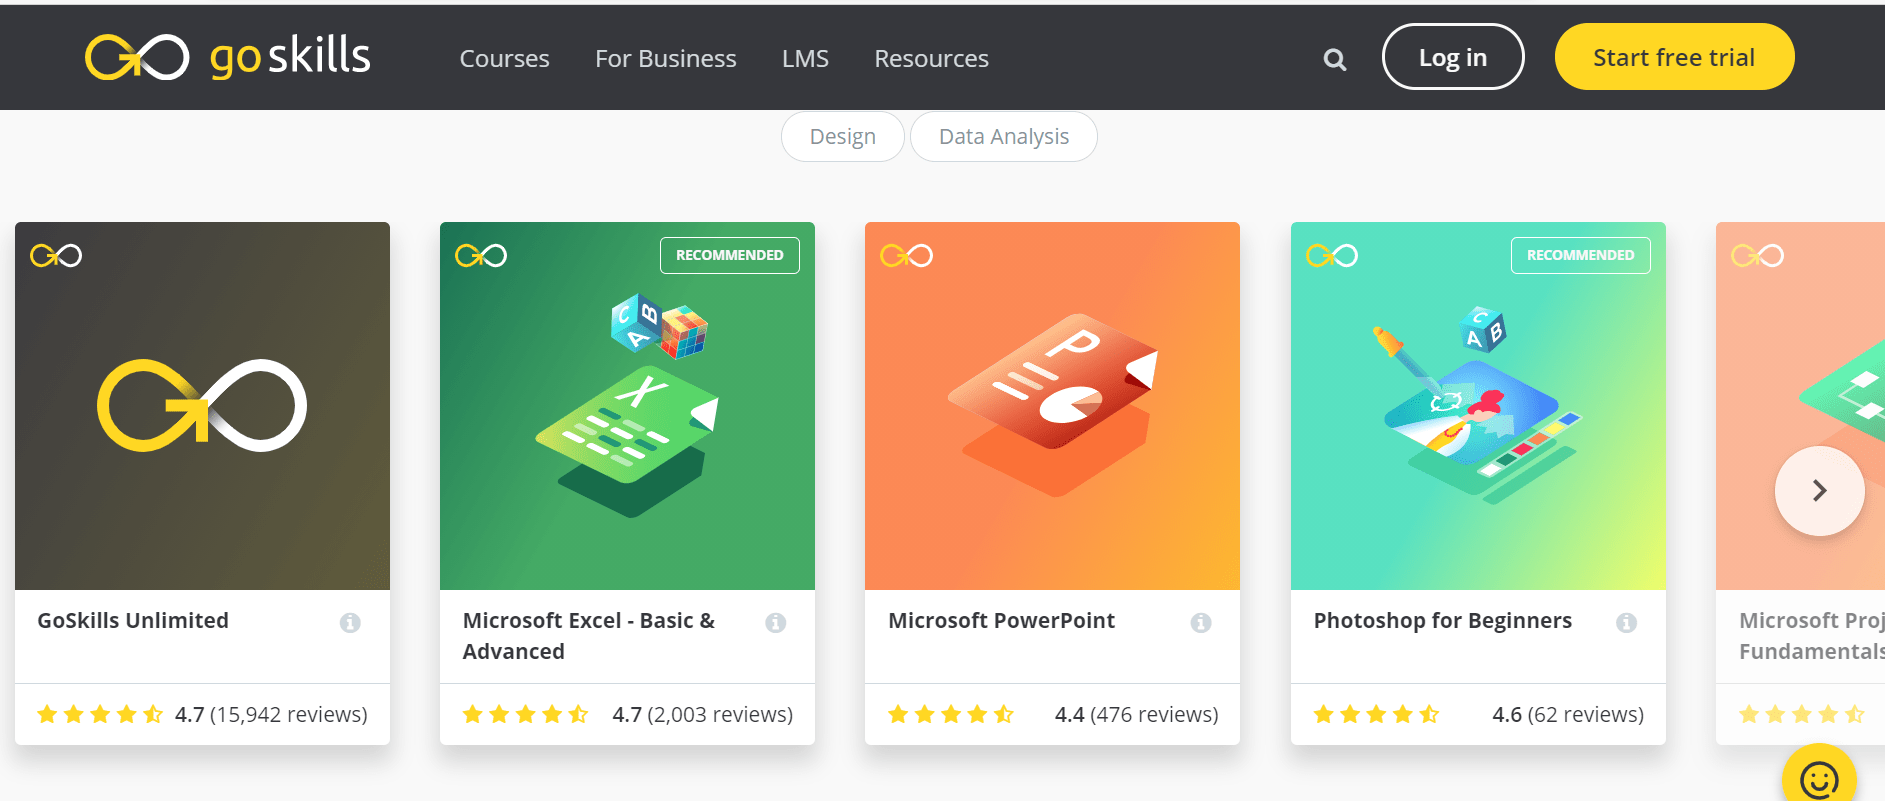 Goskills Review courses